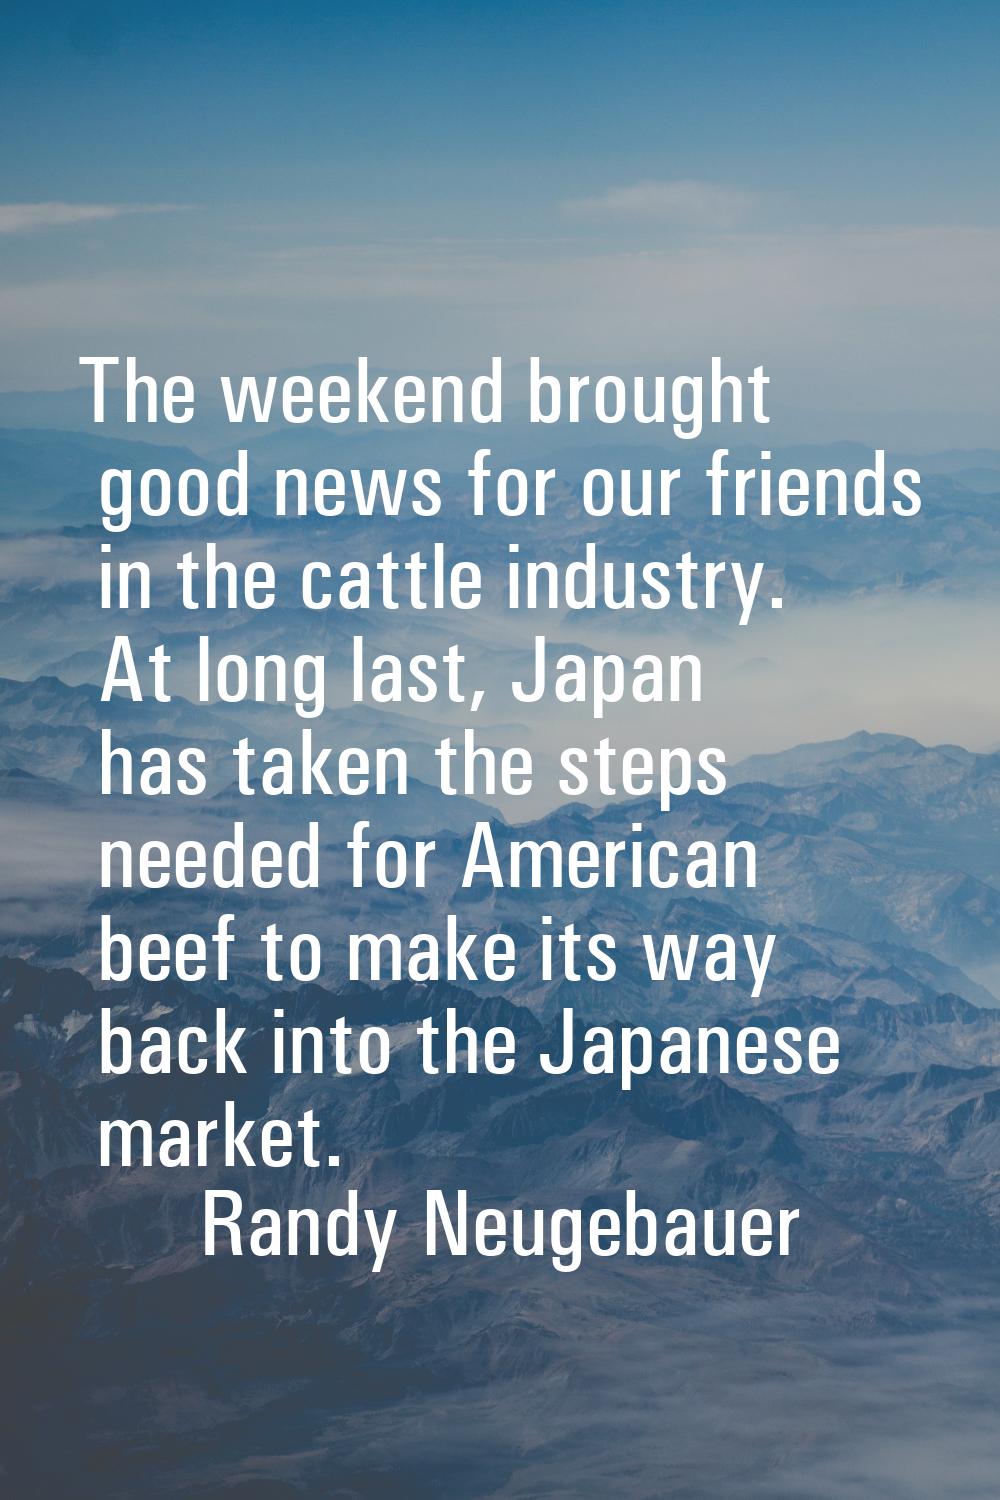 The weekend brought good news for our friends in the cattle industry. At long last, Japan has taken